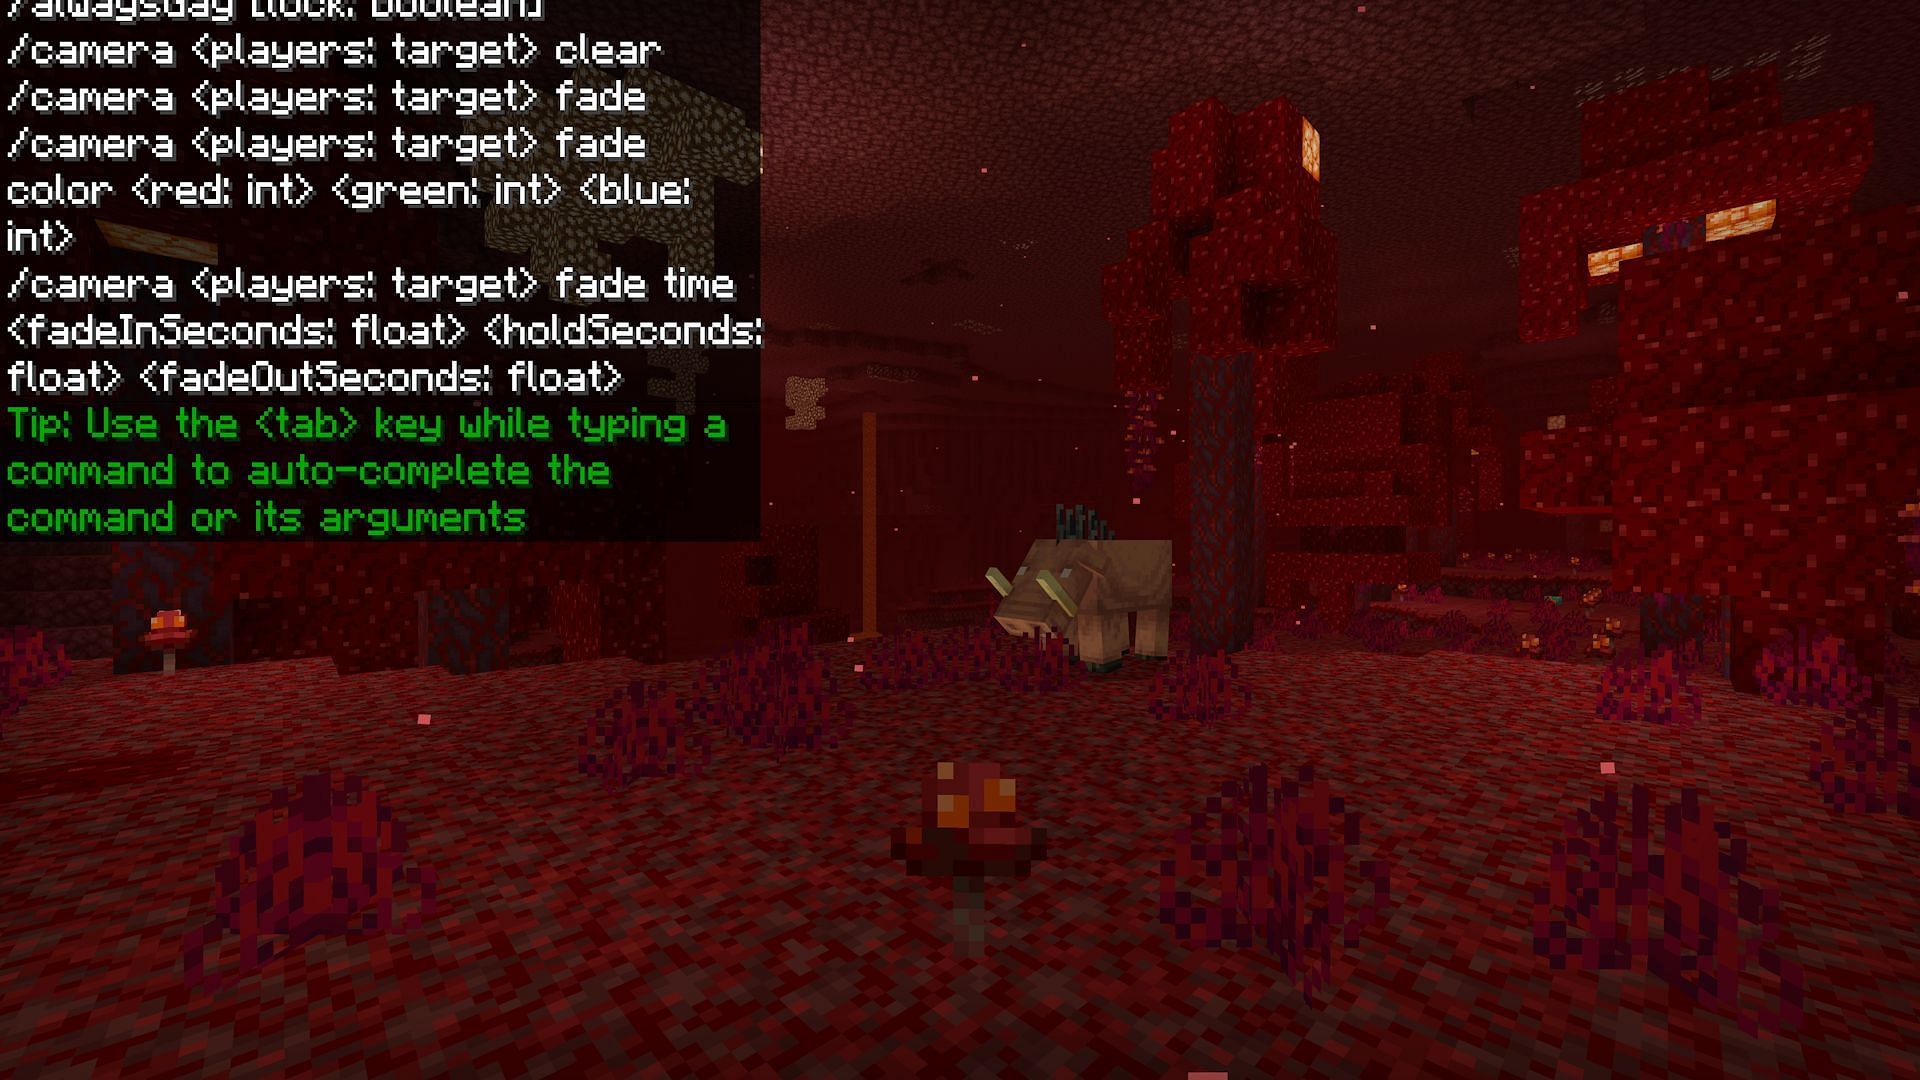 Help is an extremely useful command when learning (Image via Mojang Studios)